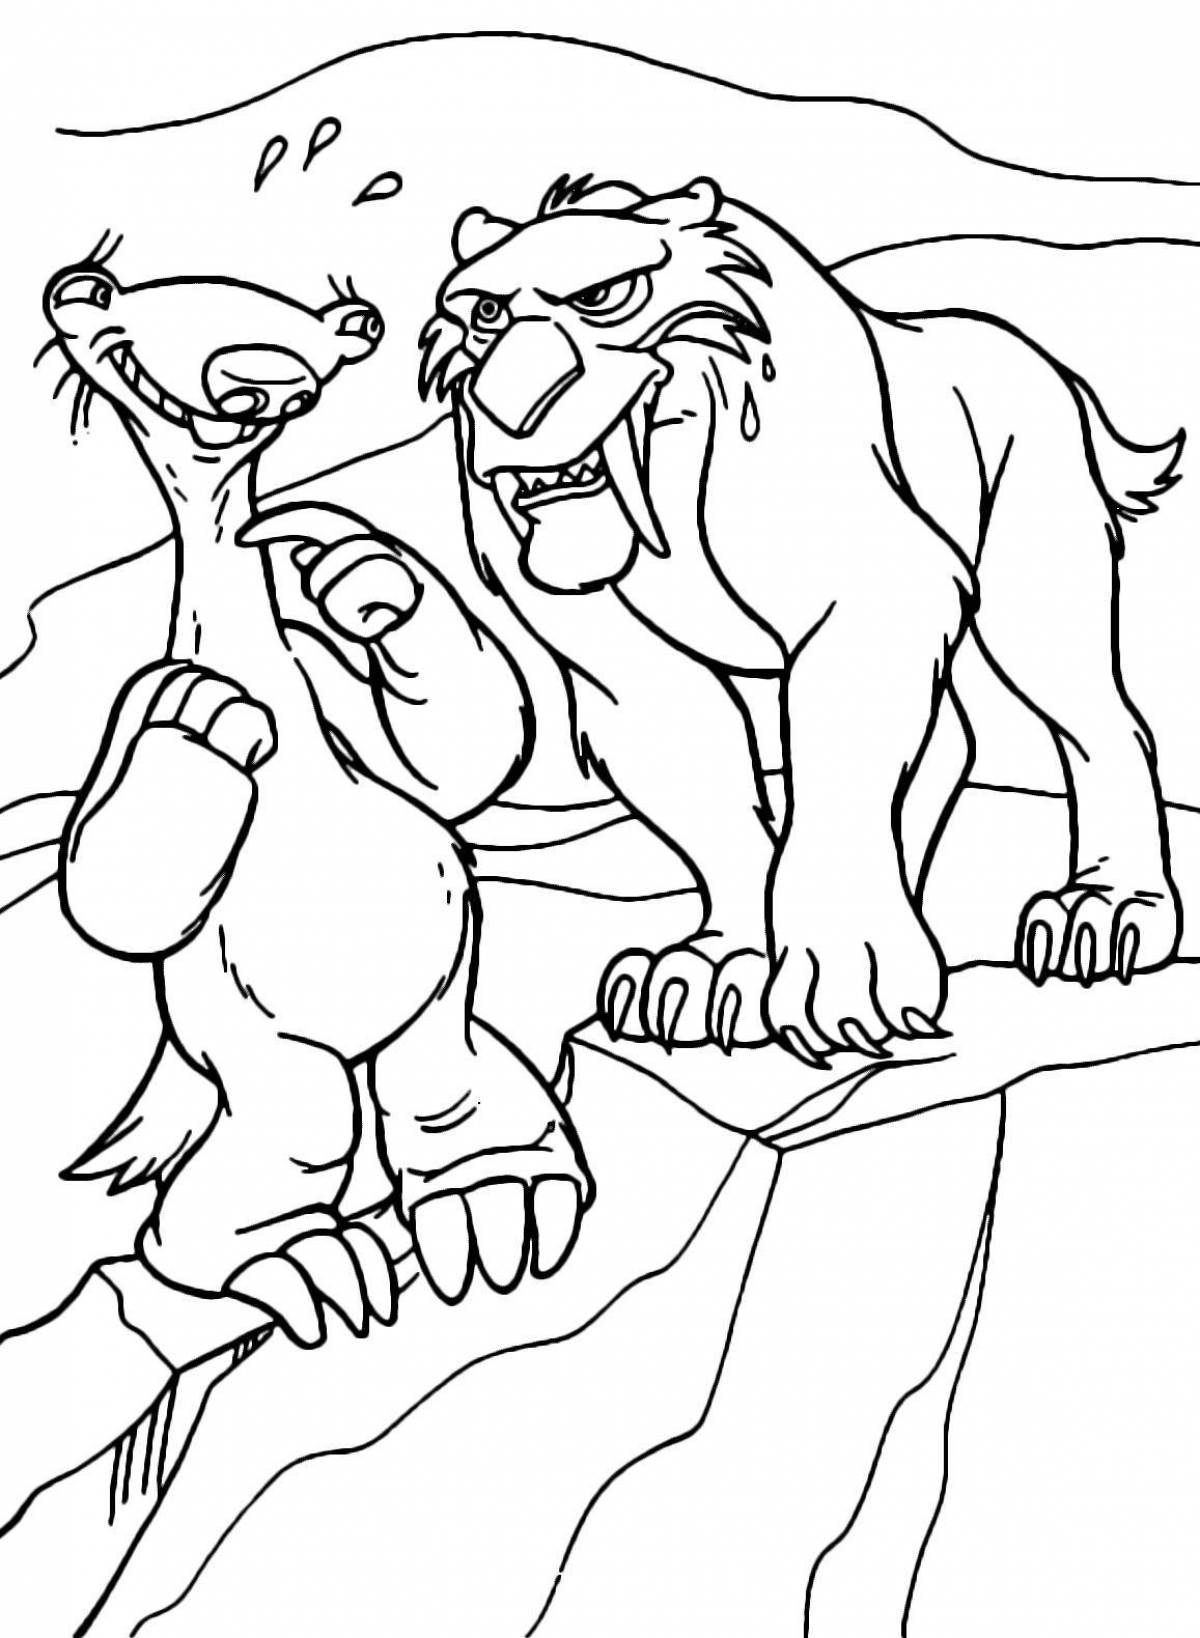 Fancy ice age 4 coloring page